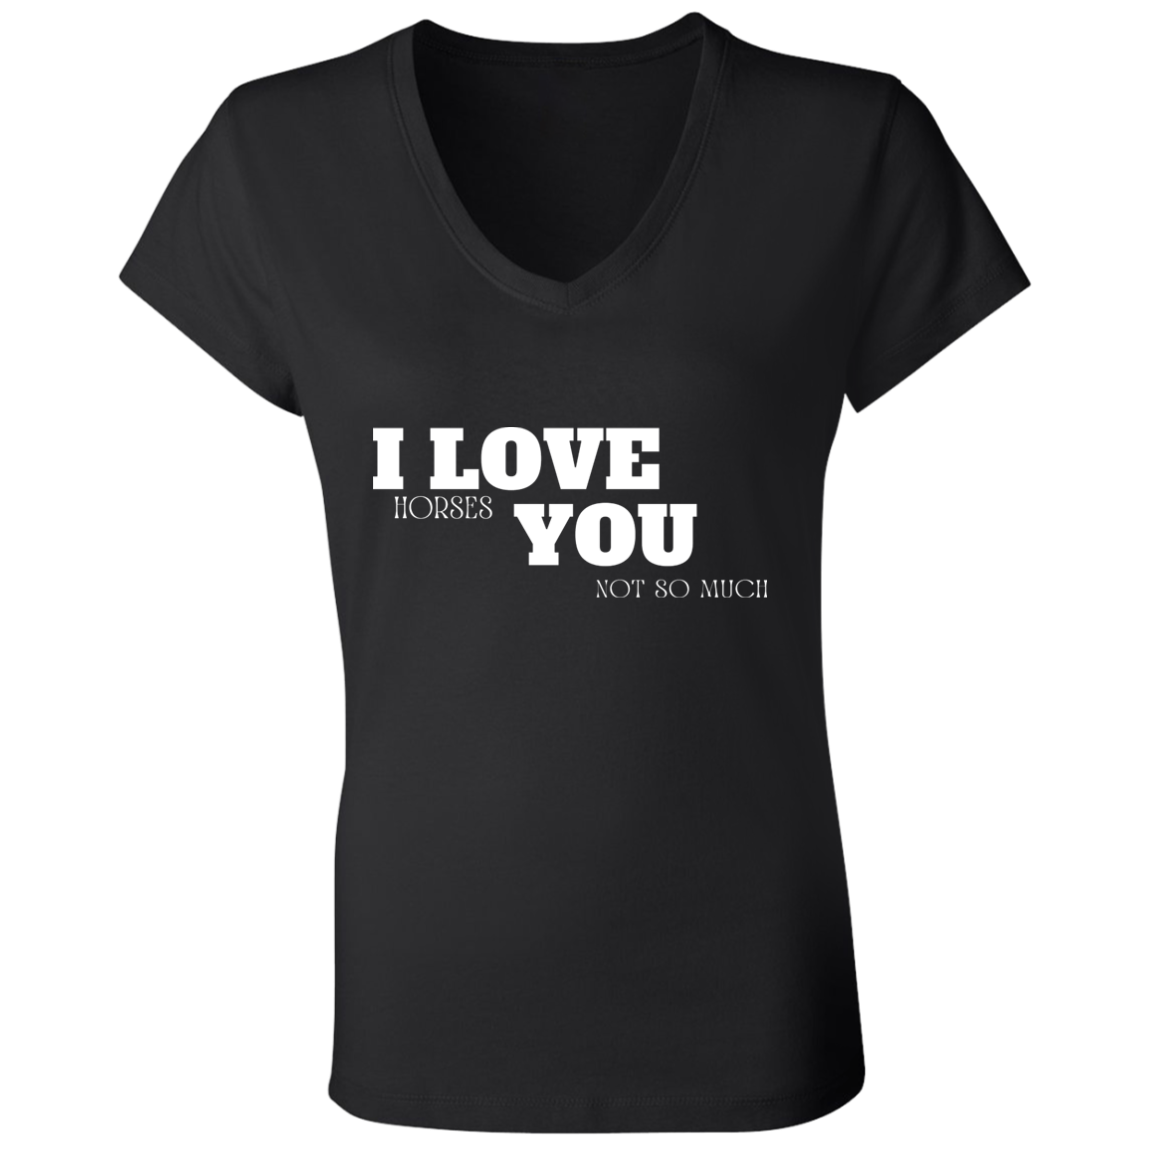 Funny Horse T-Shirt, I Love Horses, You Not So Much Play On Words - MyAllOutHorses